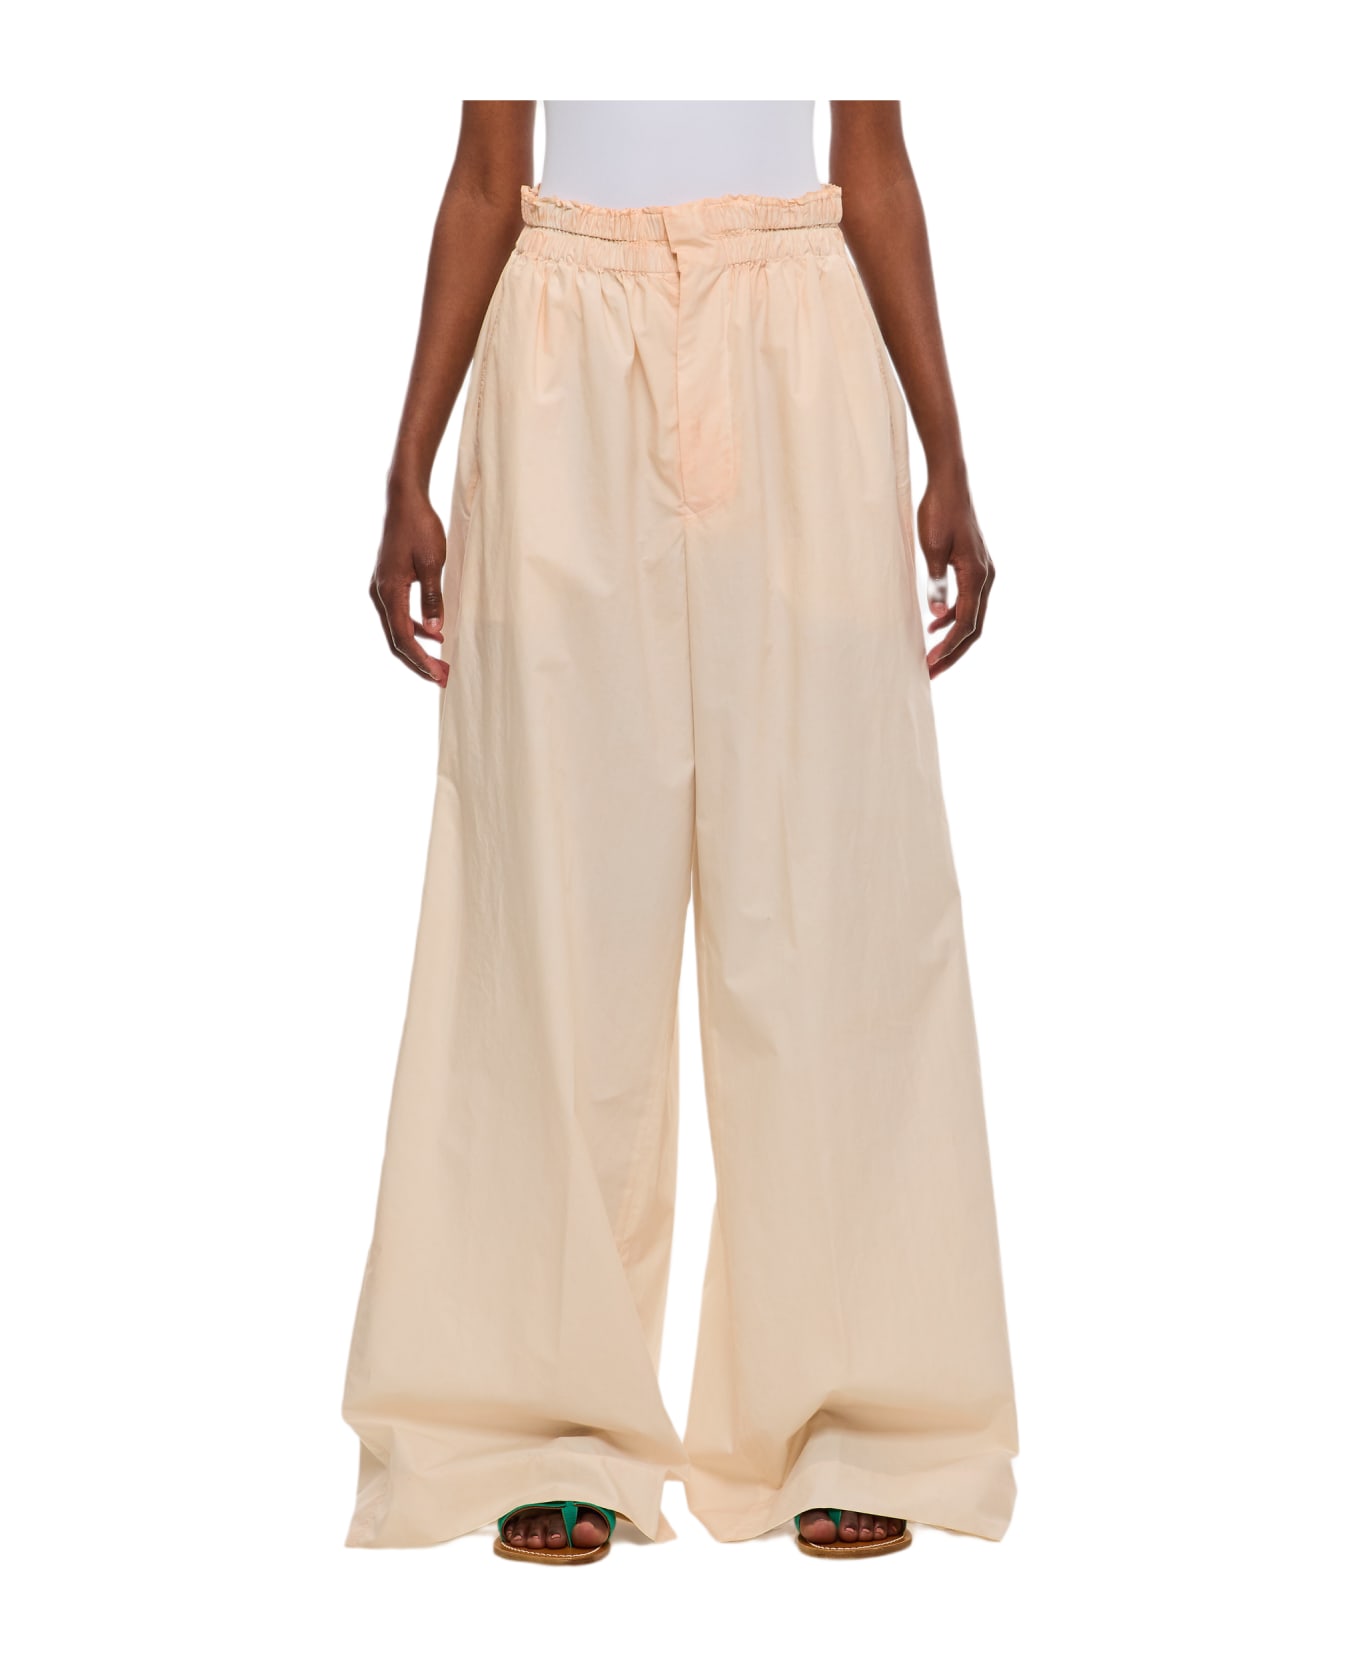 Quira Oversized Cotton Trousers - Pink ボトムス